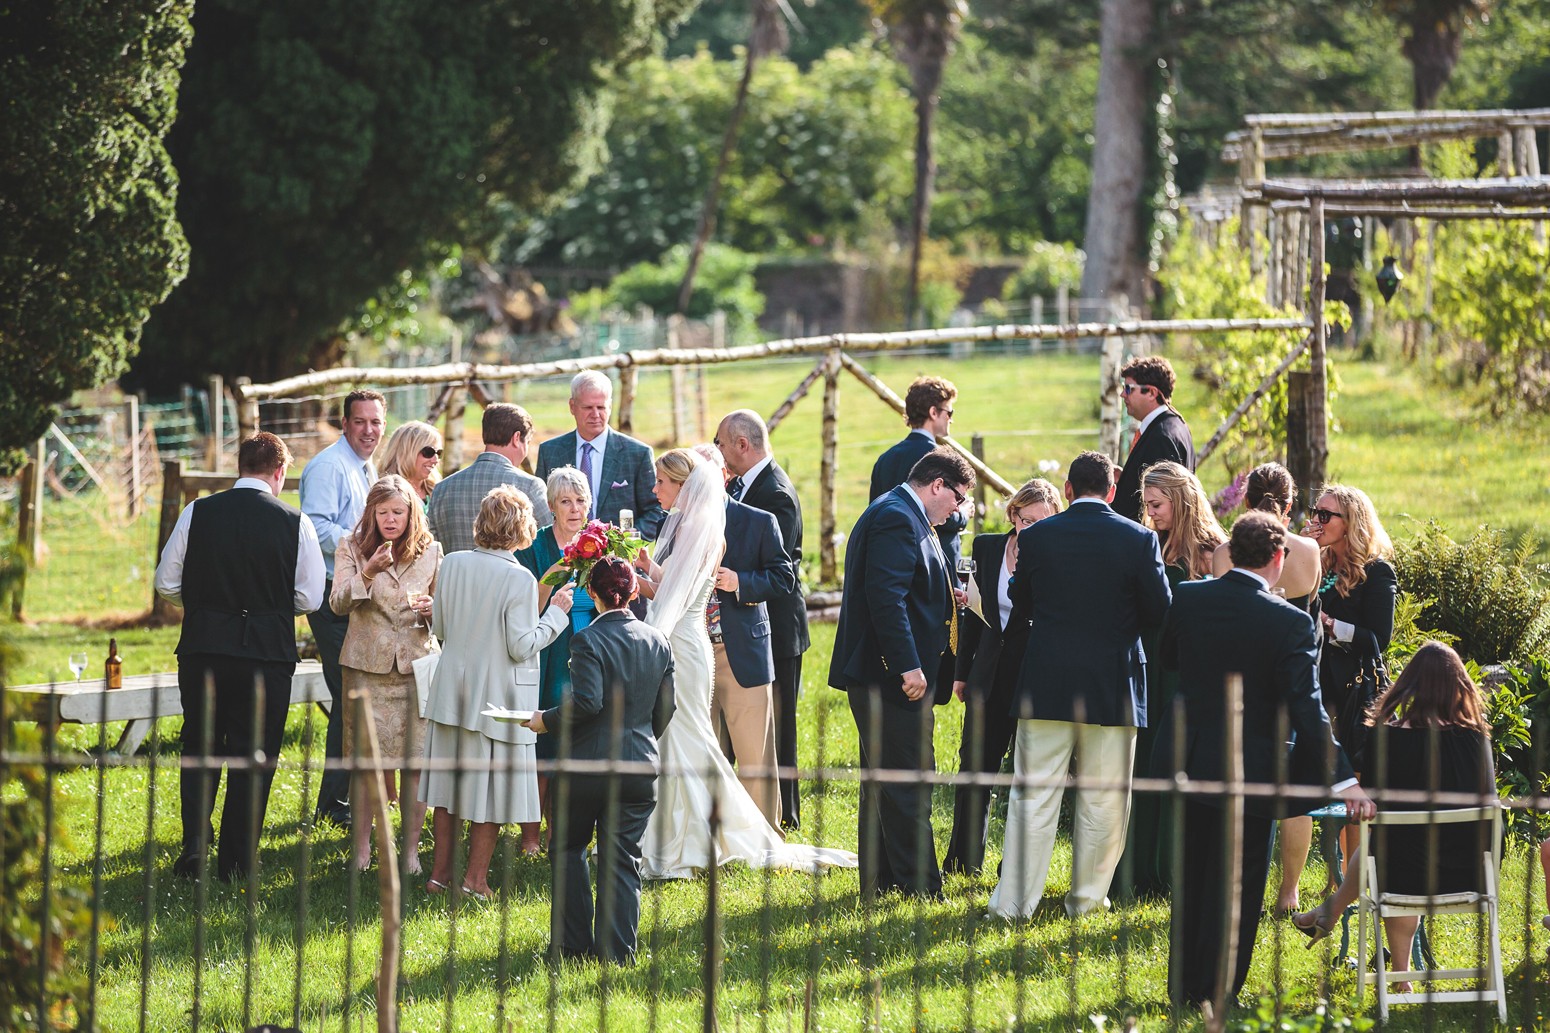 Longueville House Weddings, Fine Dining and Bespoke Self-Catering